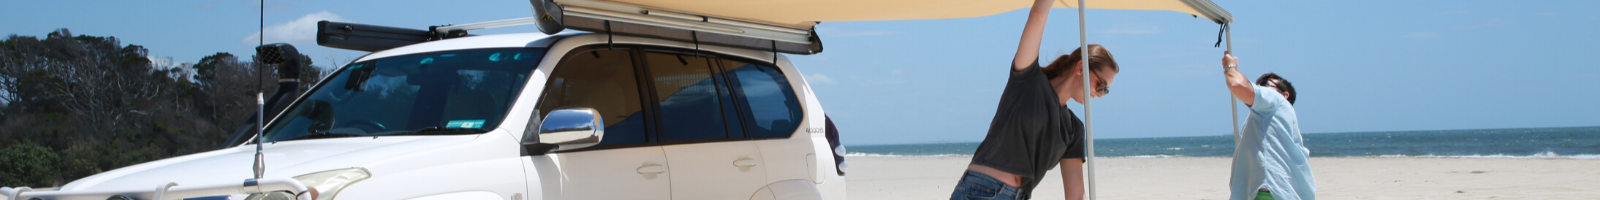 Secure your awning with its poles